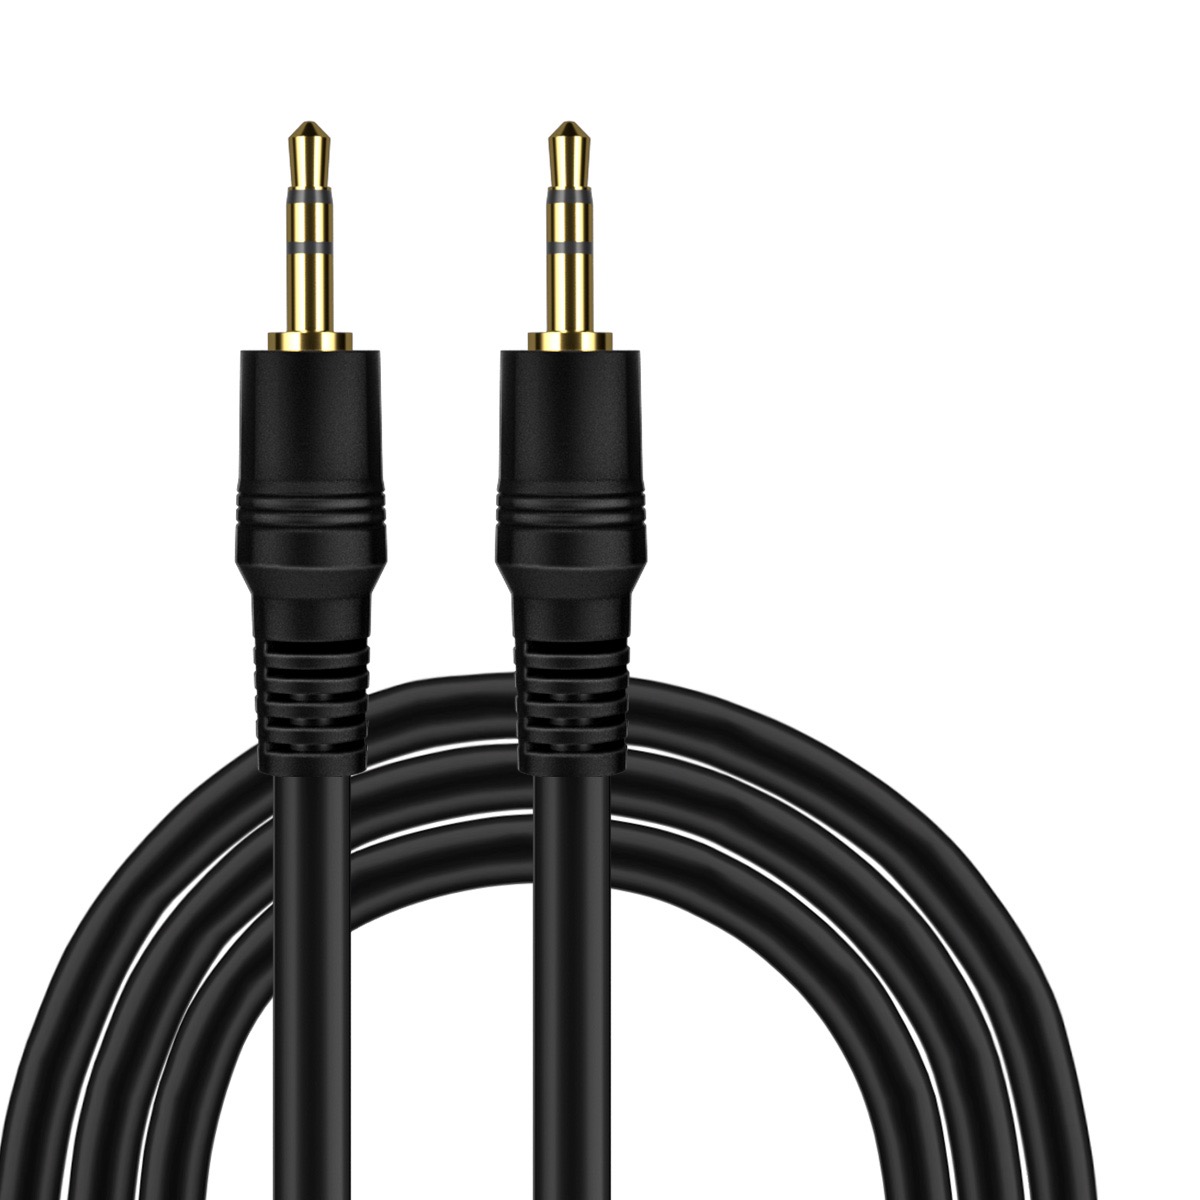 3.5mm Audio Cable Male to Male Car Stereo AUX Extension Cable for Phone MP3 MP4